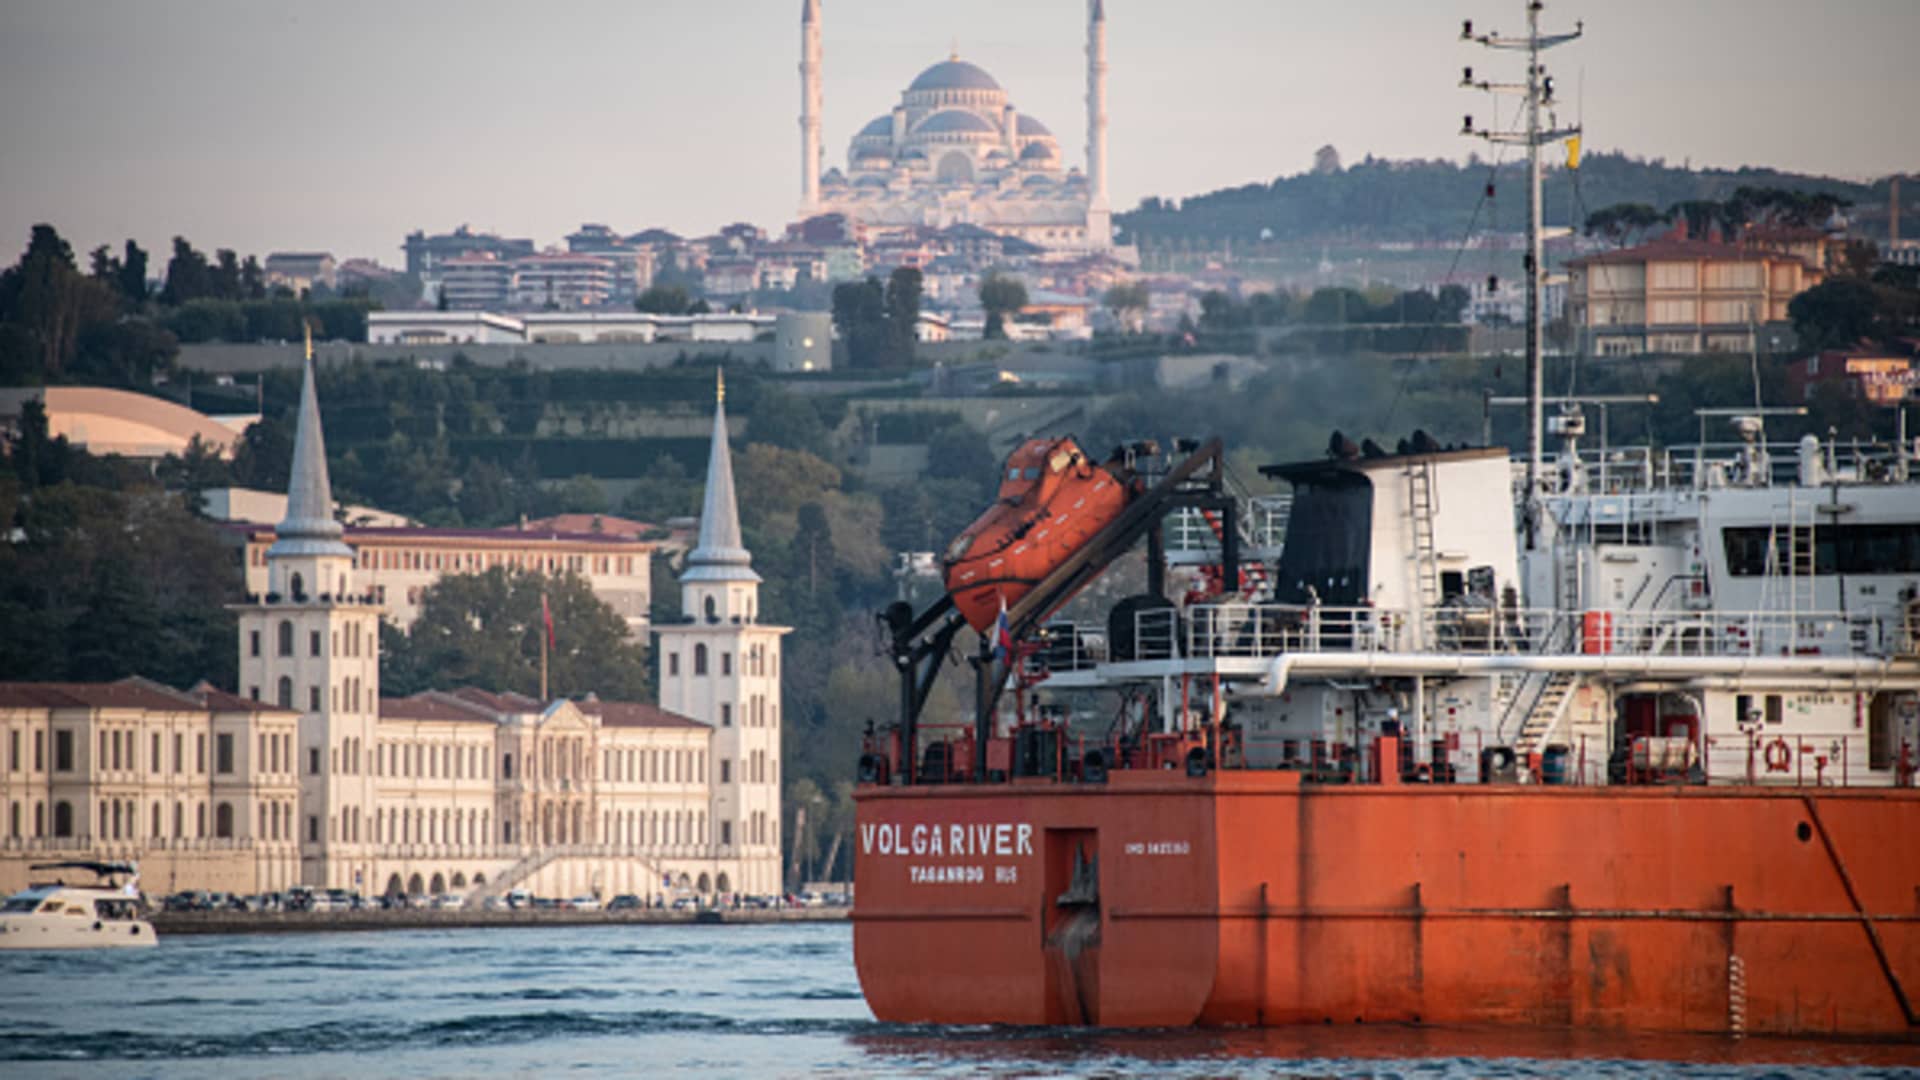 Turkey is stopping oil not under Russian sanctions, raising global energy market supply concerns